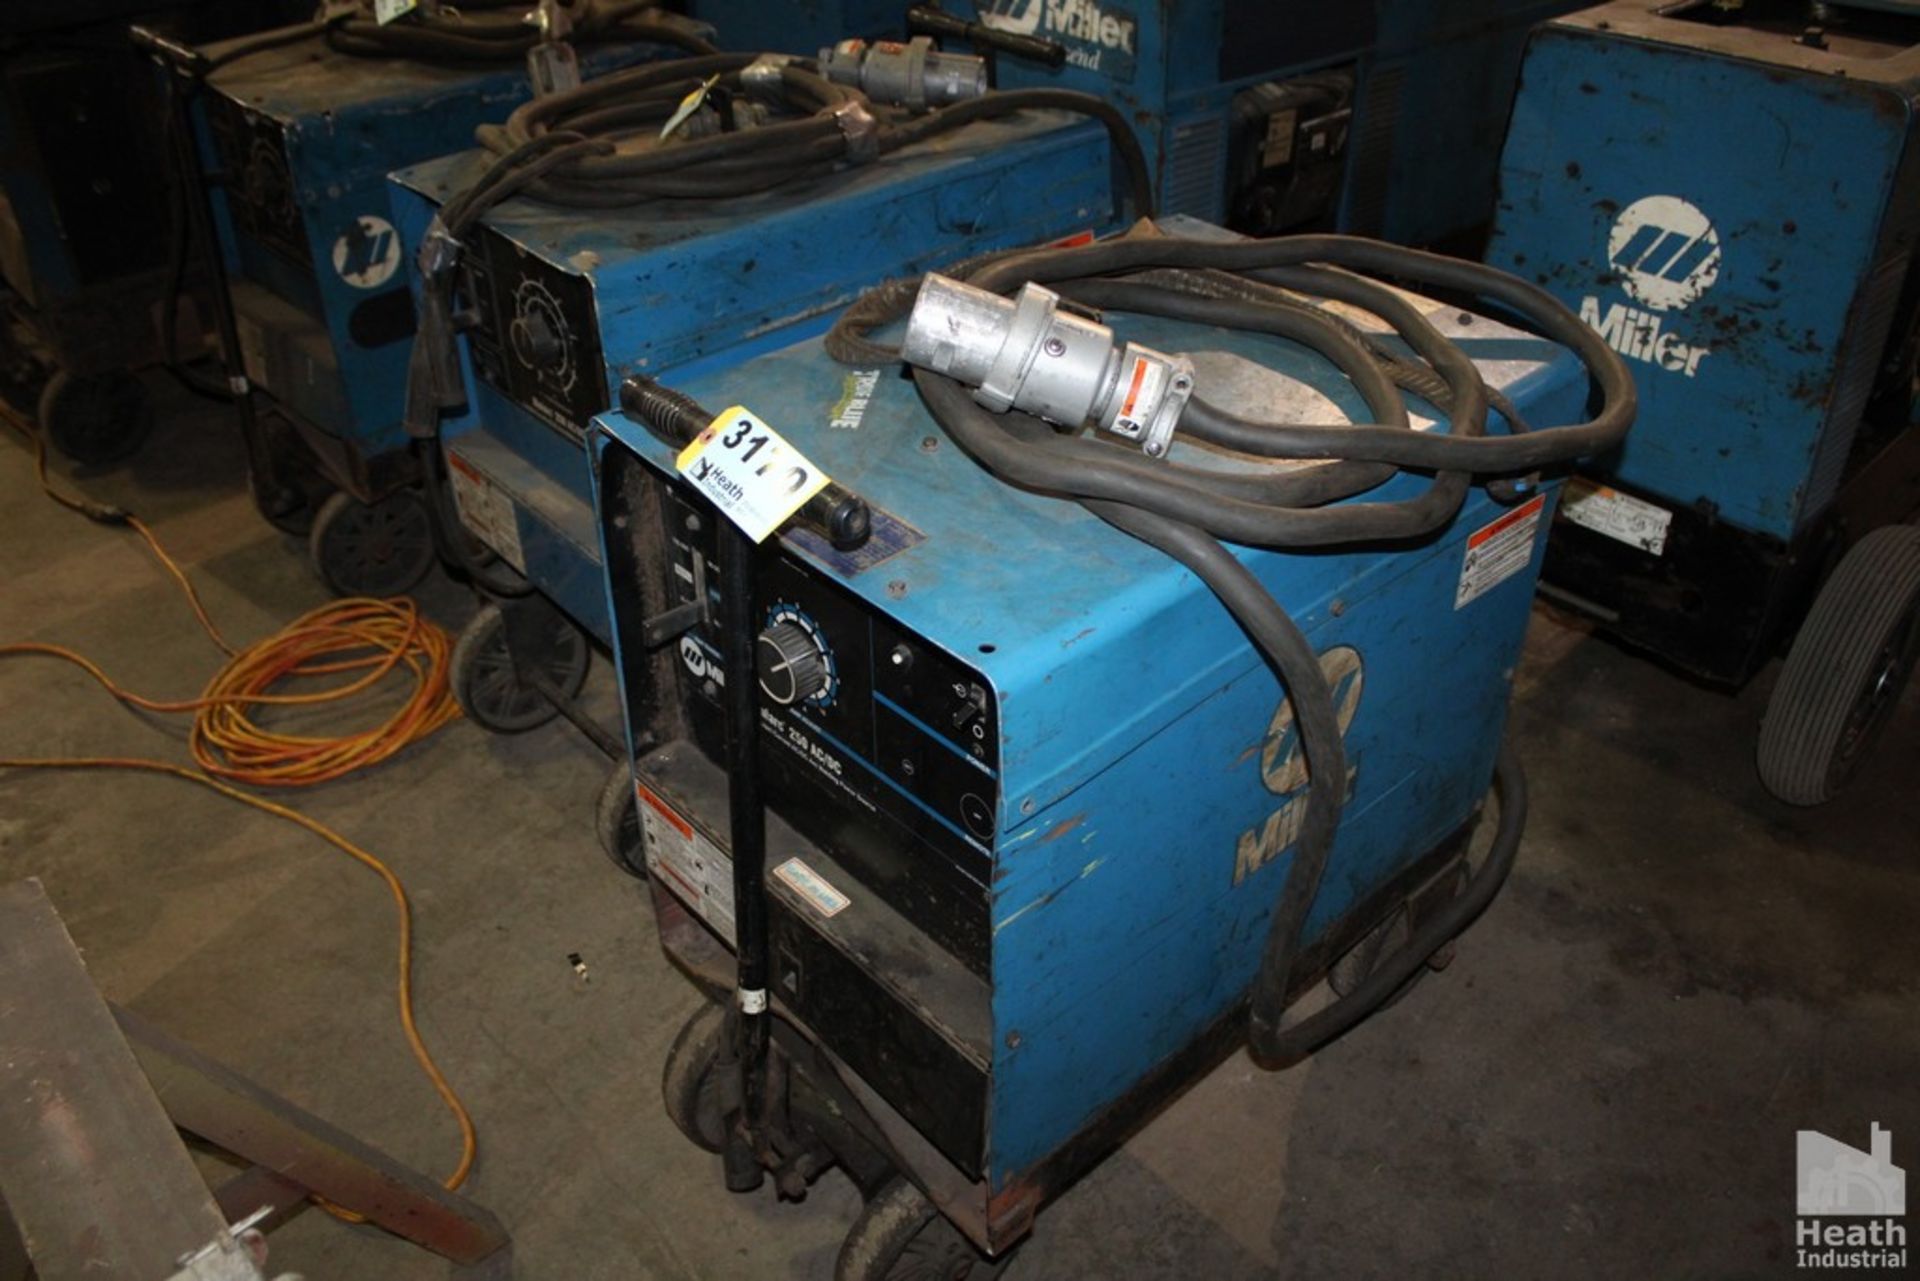 MILLER DIAL ARC 250 AC/DC CONSTANT CURRENT AC/DC ARC WELDING POWER SOURCE WITH CART, S/N KJ267009